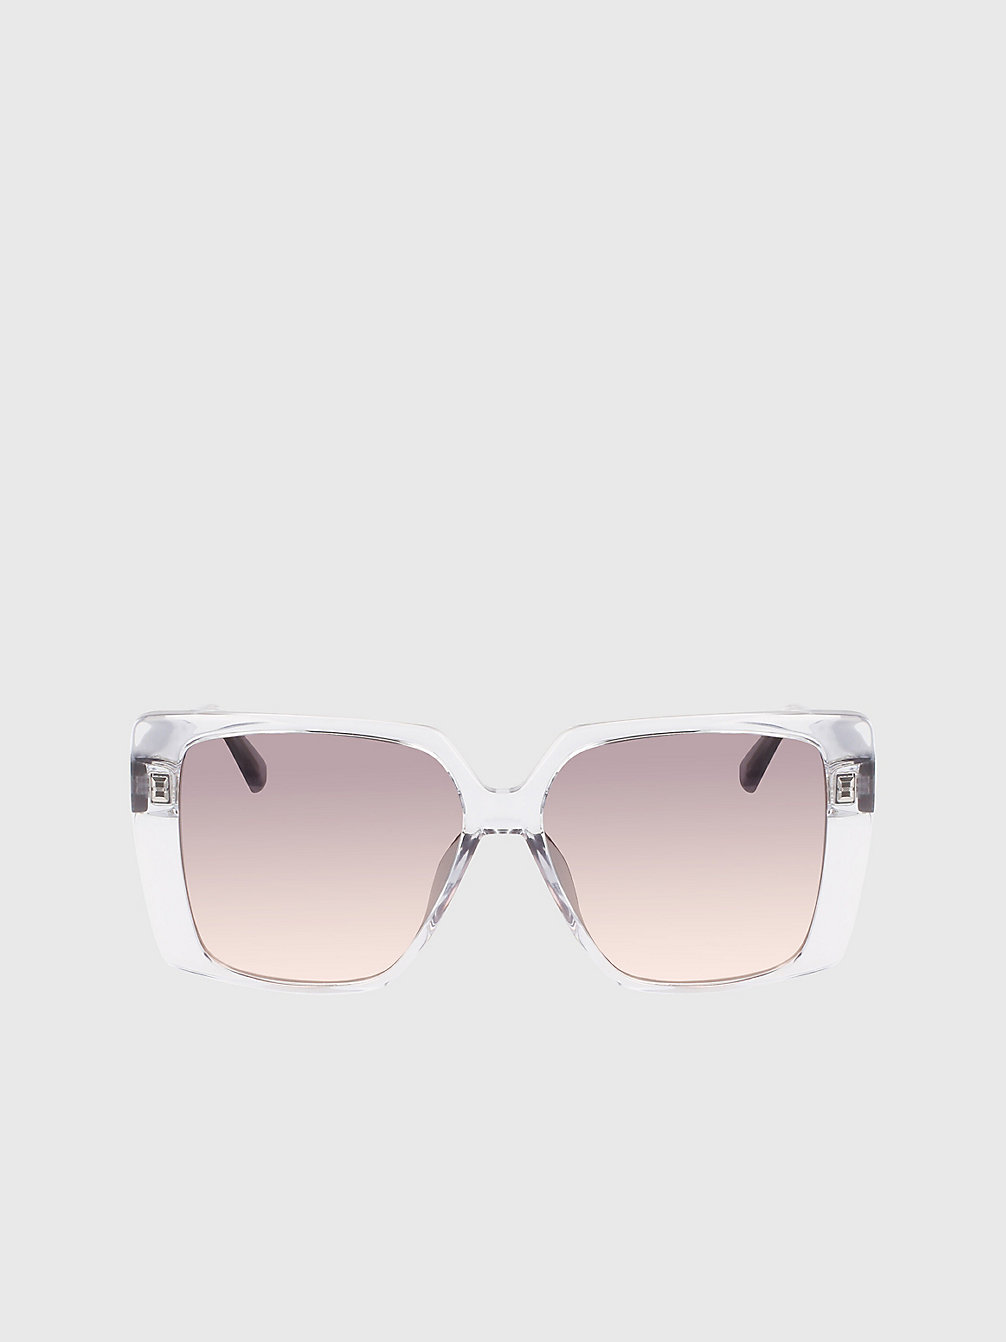 CRYSTAL CLEAR Square Sunglasses Ckj22607s undefined women Calvin Klein